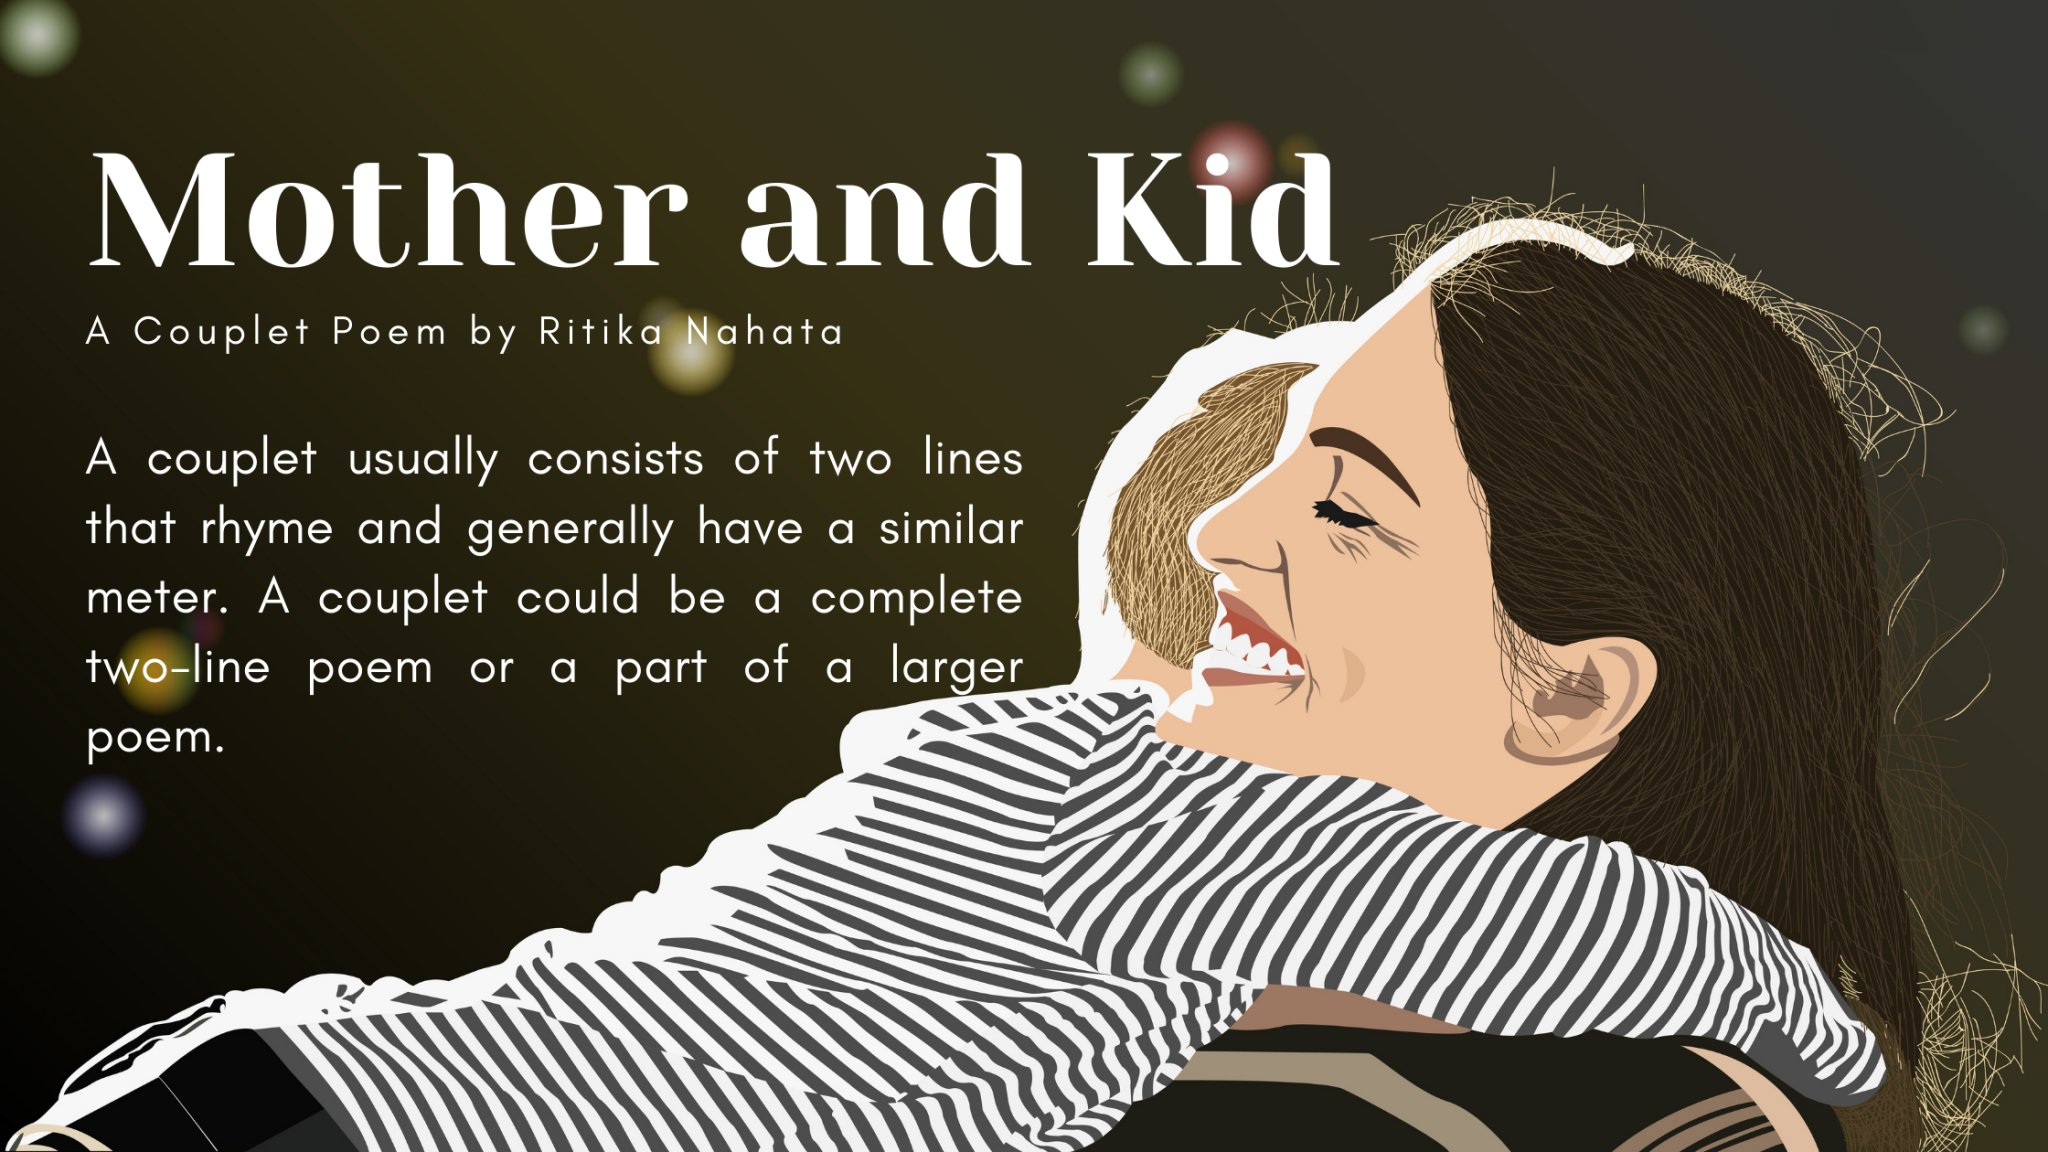 Mother and Kid | A Couplet poem by Ritika Nahata at UpDivine